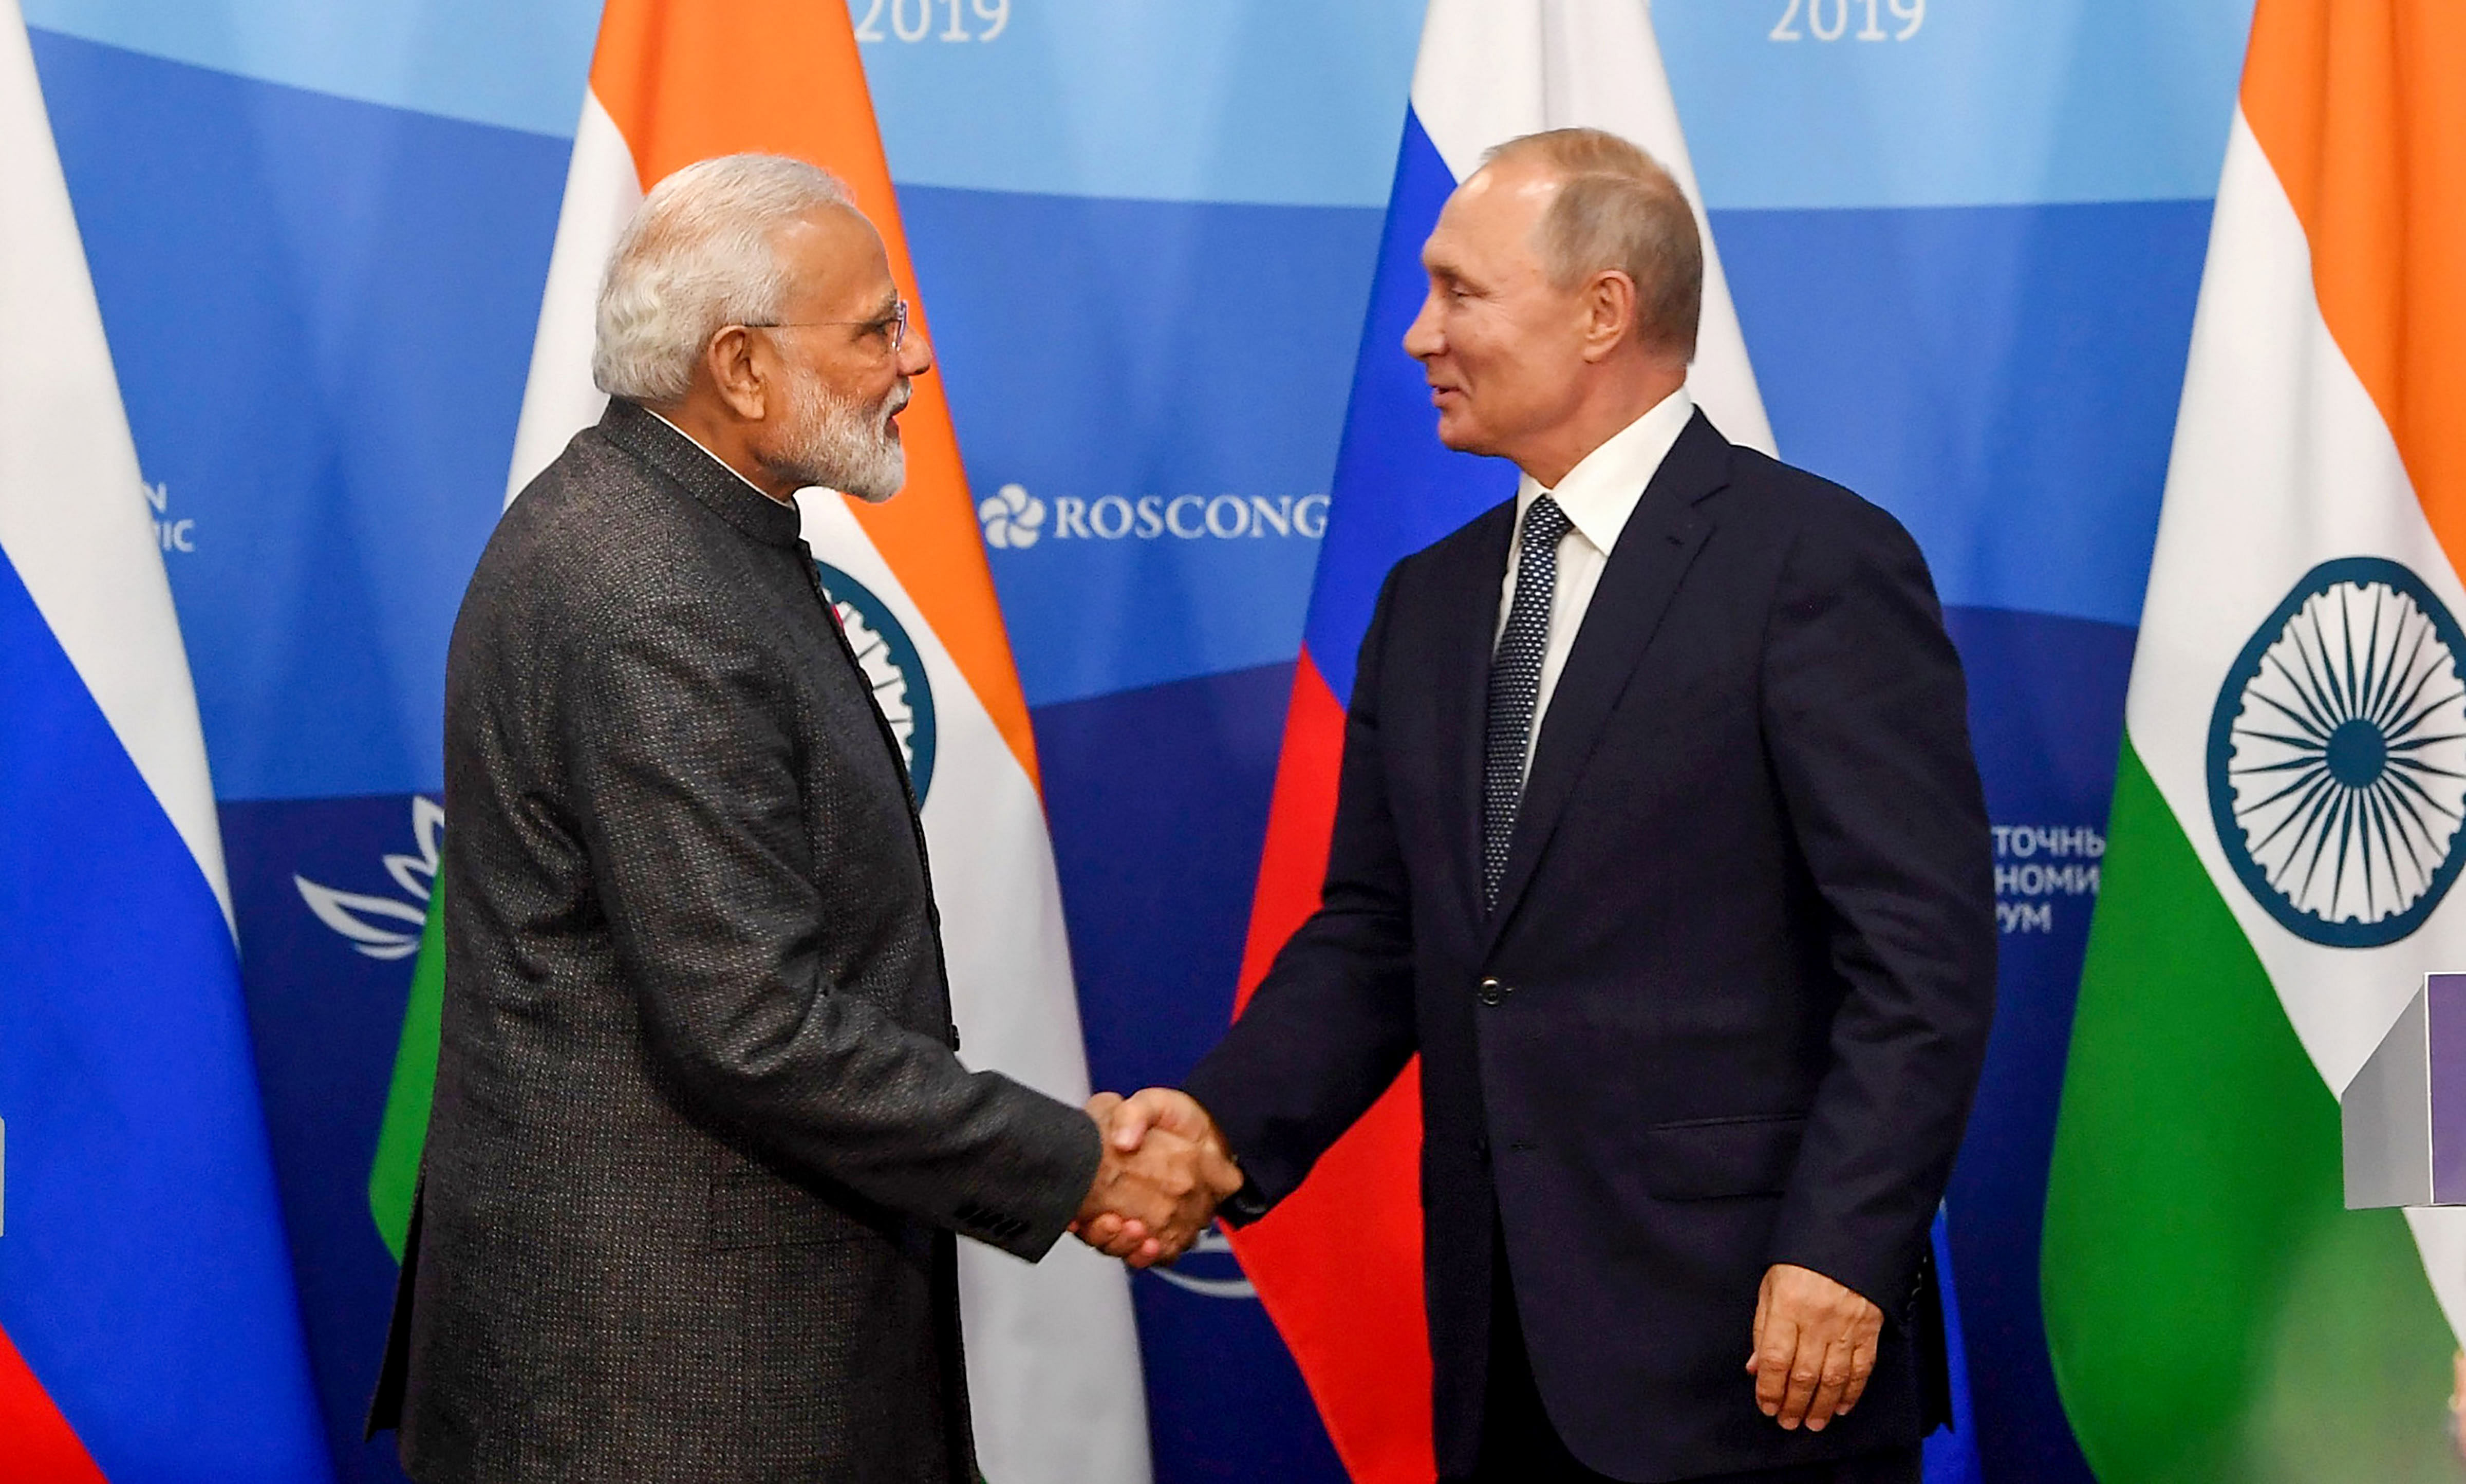 Prime Minister Narendra Modi shakes hands with President of Russian Federation Vladimir Putin during the joint press statements, at Vladivostok, in Russia. (PTI Photo)